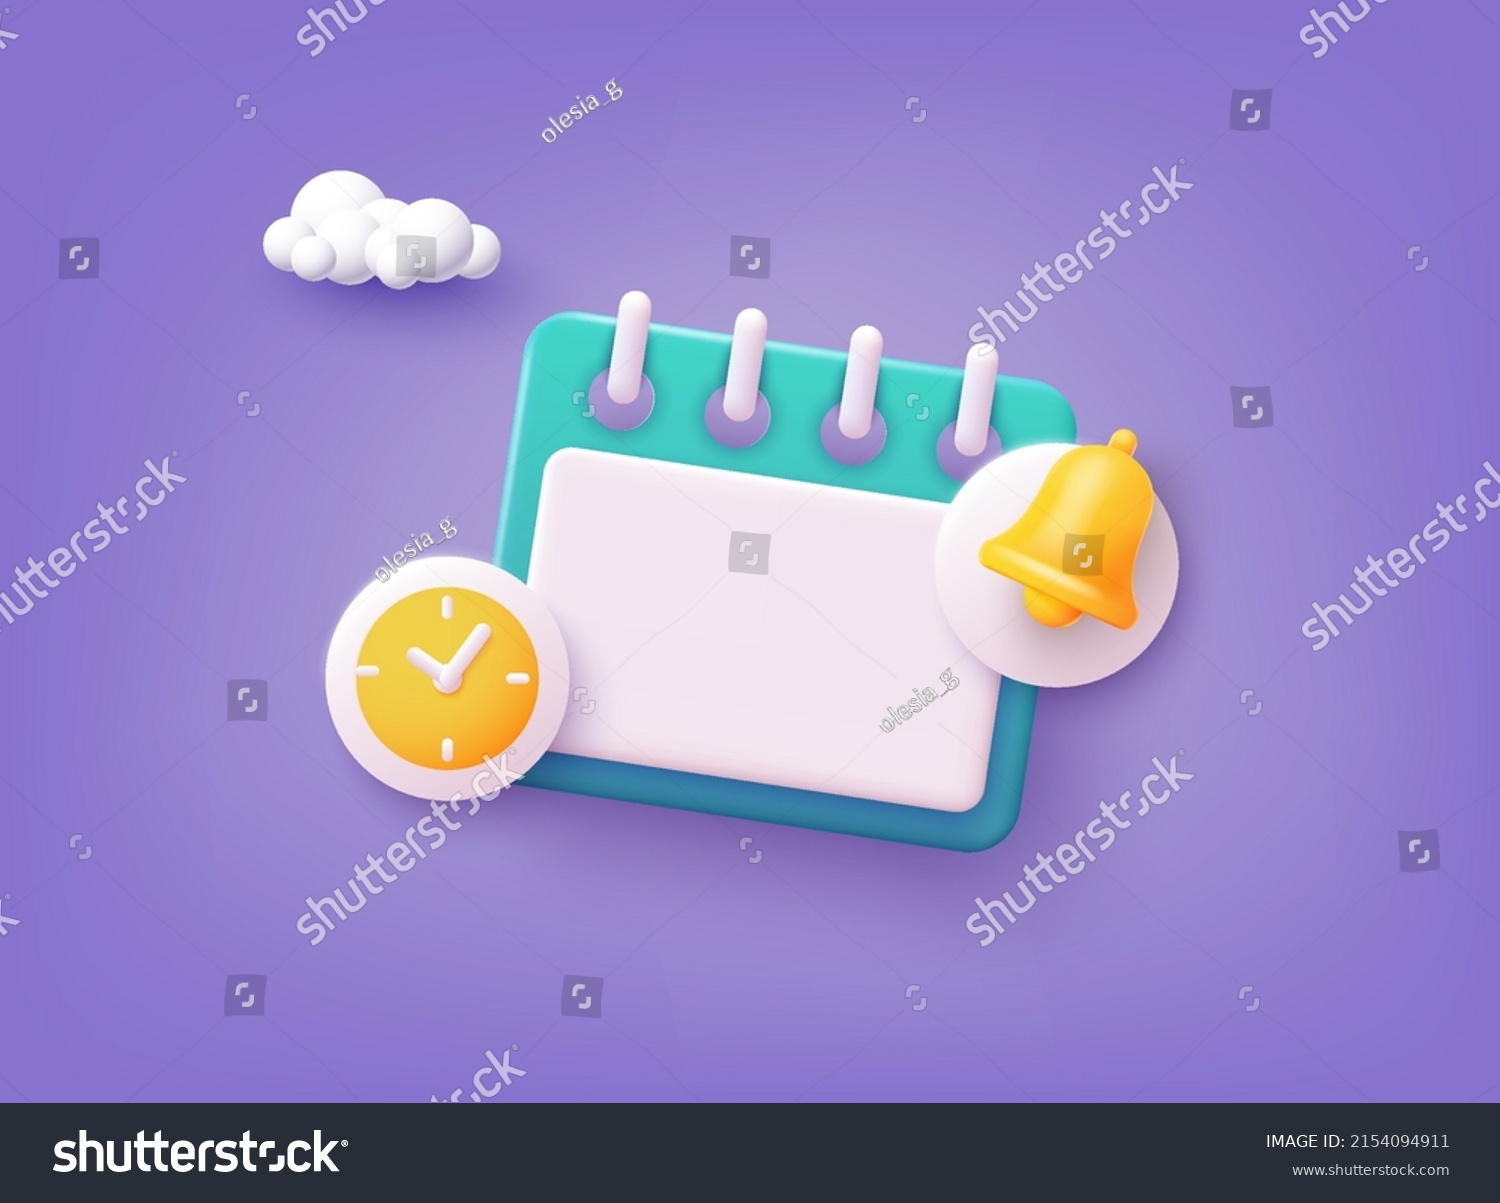 SVG of Calendar icon with notifications icons. Business planning ,events, reminder and timetable. 3D Web Vector Illustrations. svg